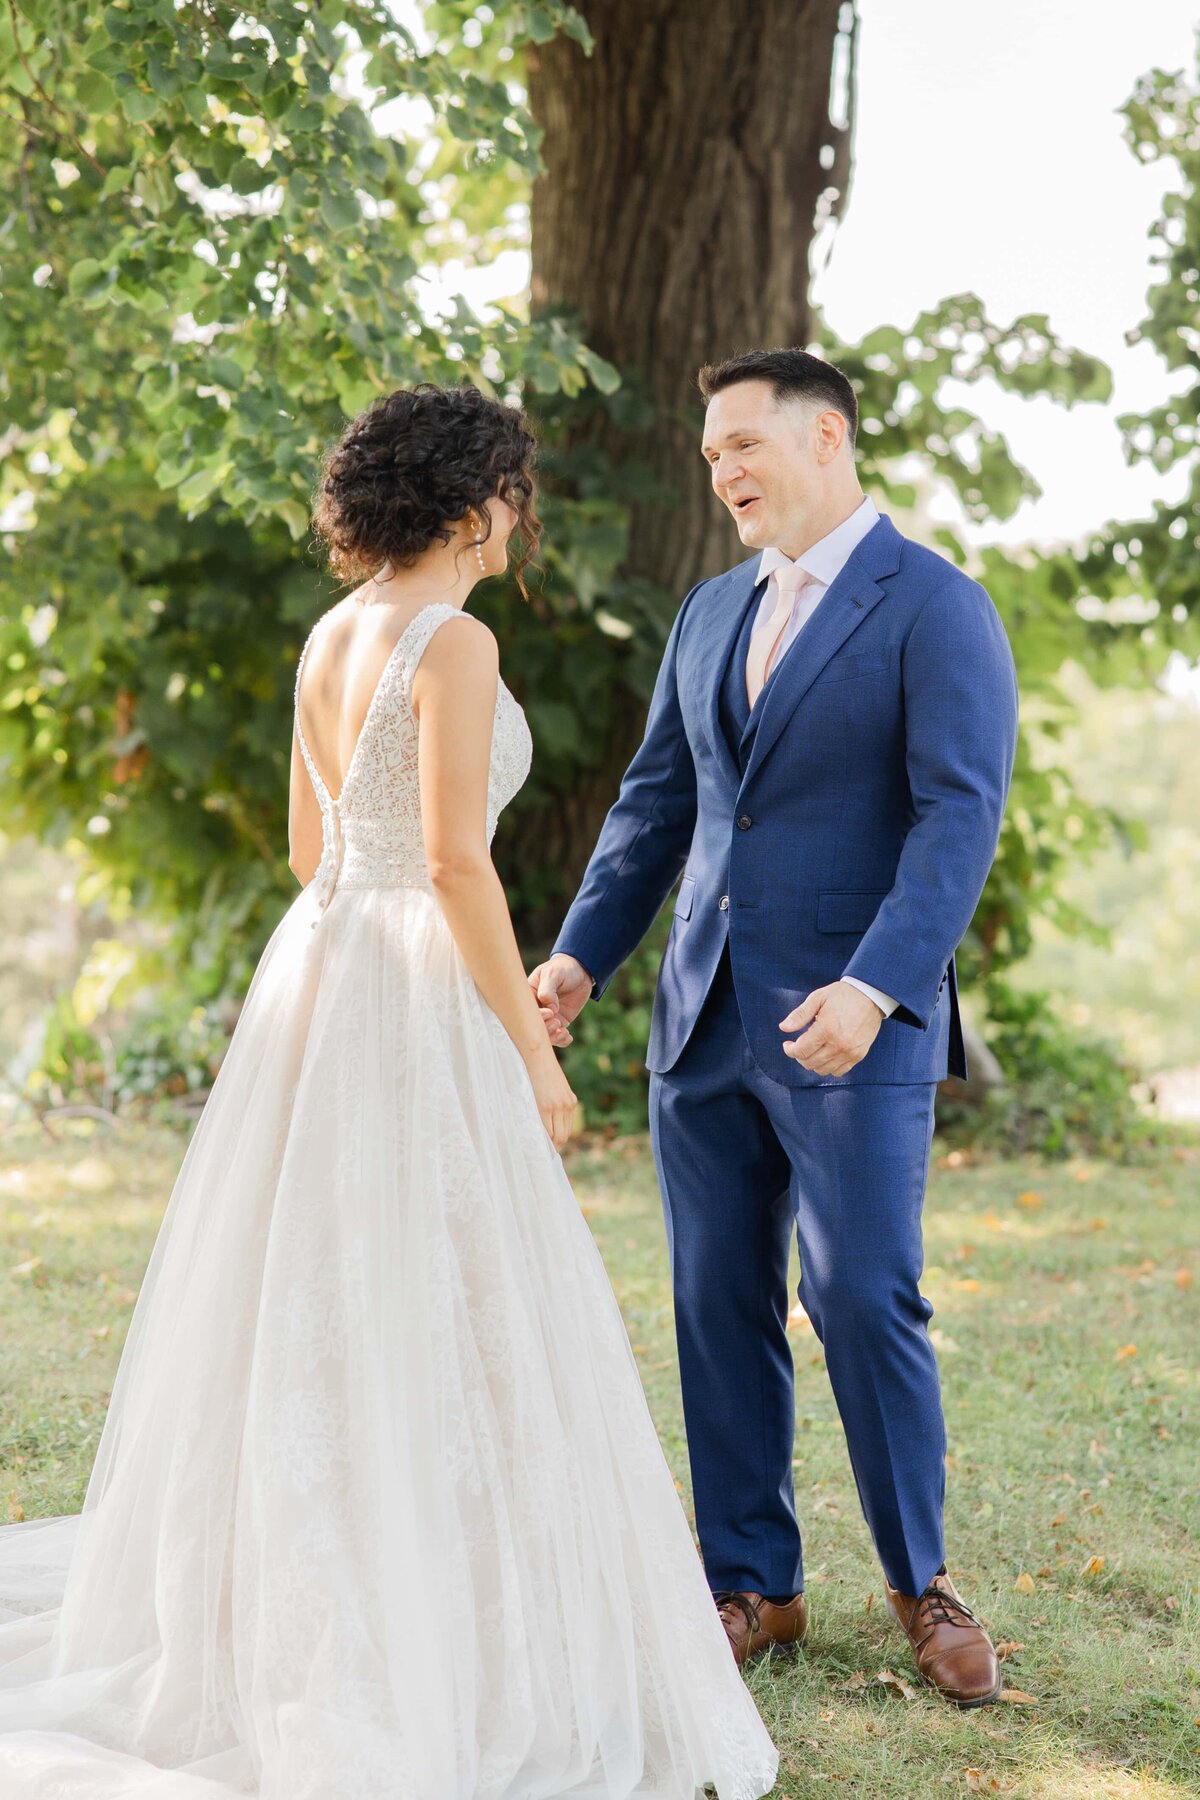 A bride in a white lace dress and a groom in a blue suit smiling and holding hands outdoors near a tree at Park Farm Winery.